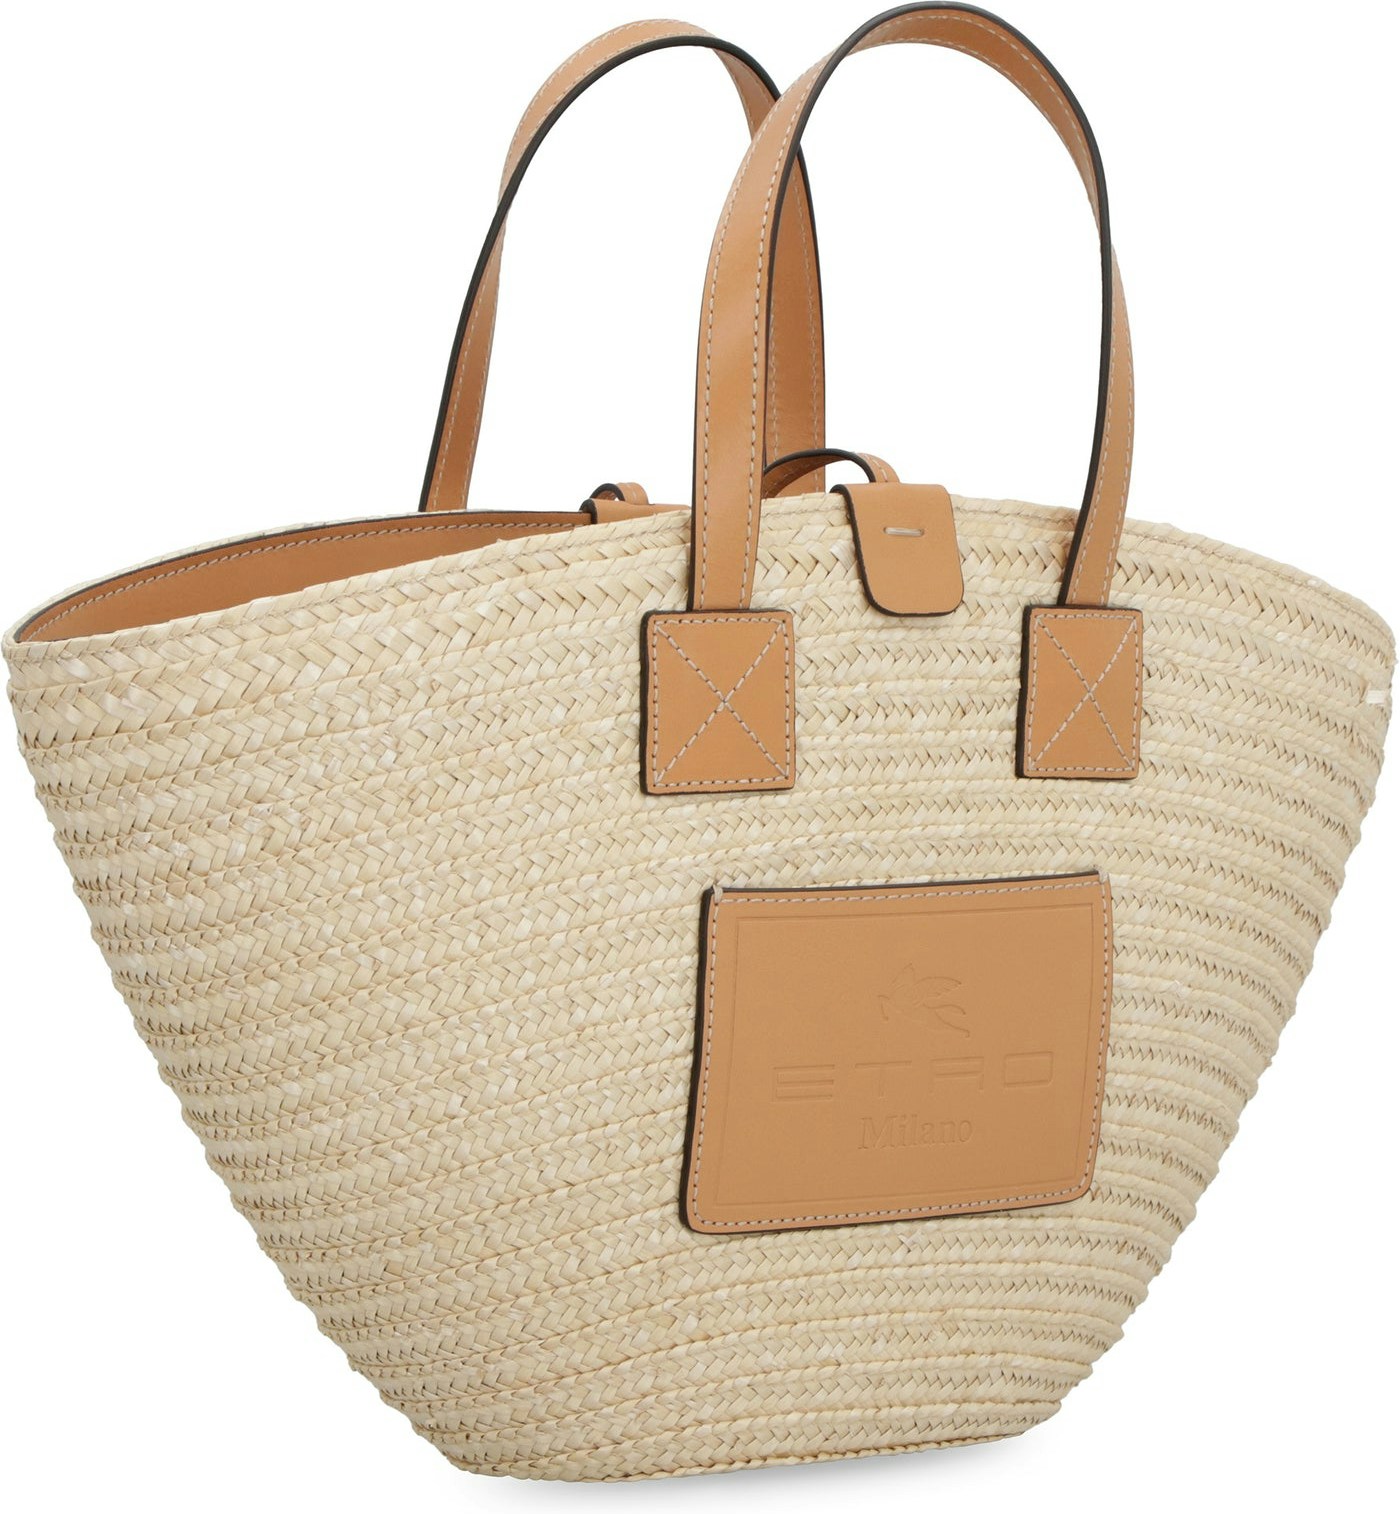 Etro tote bag in woven straw